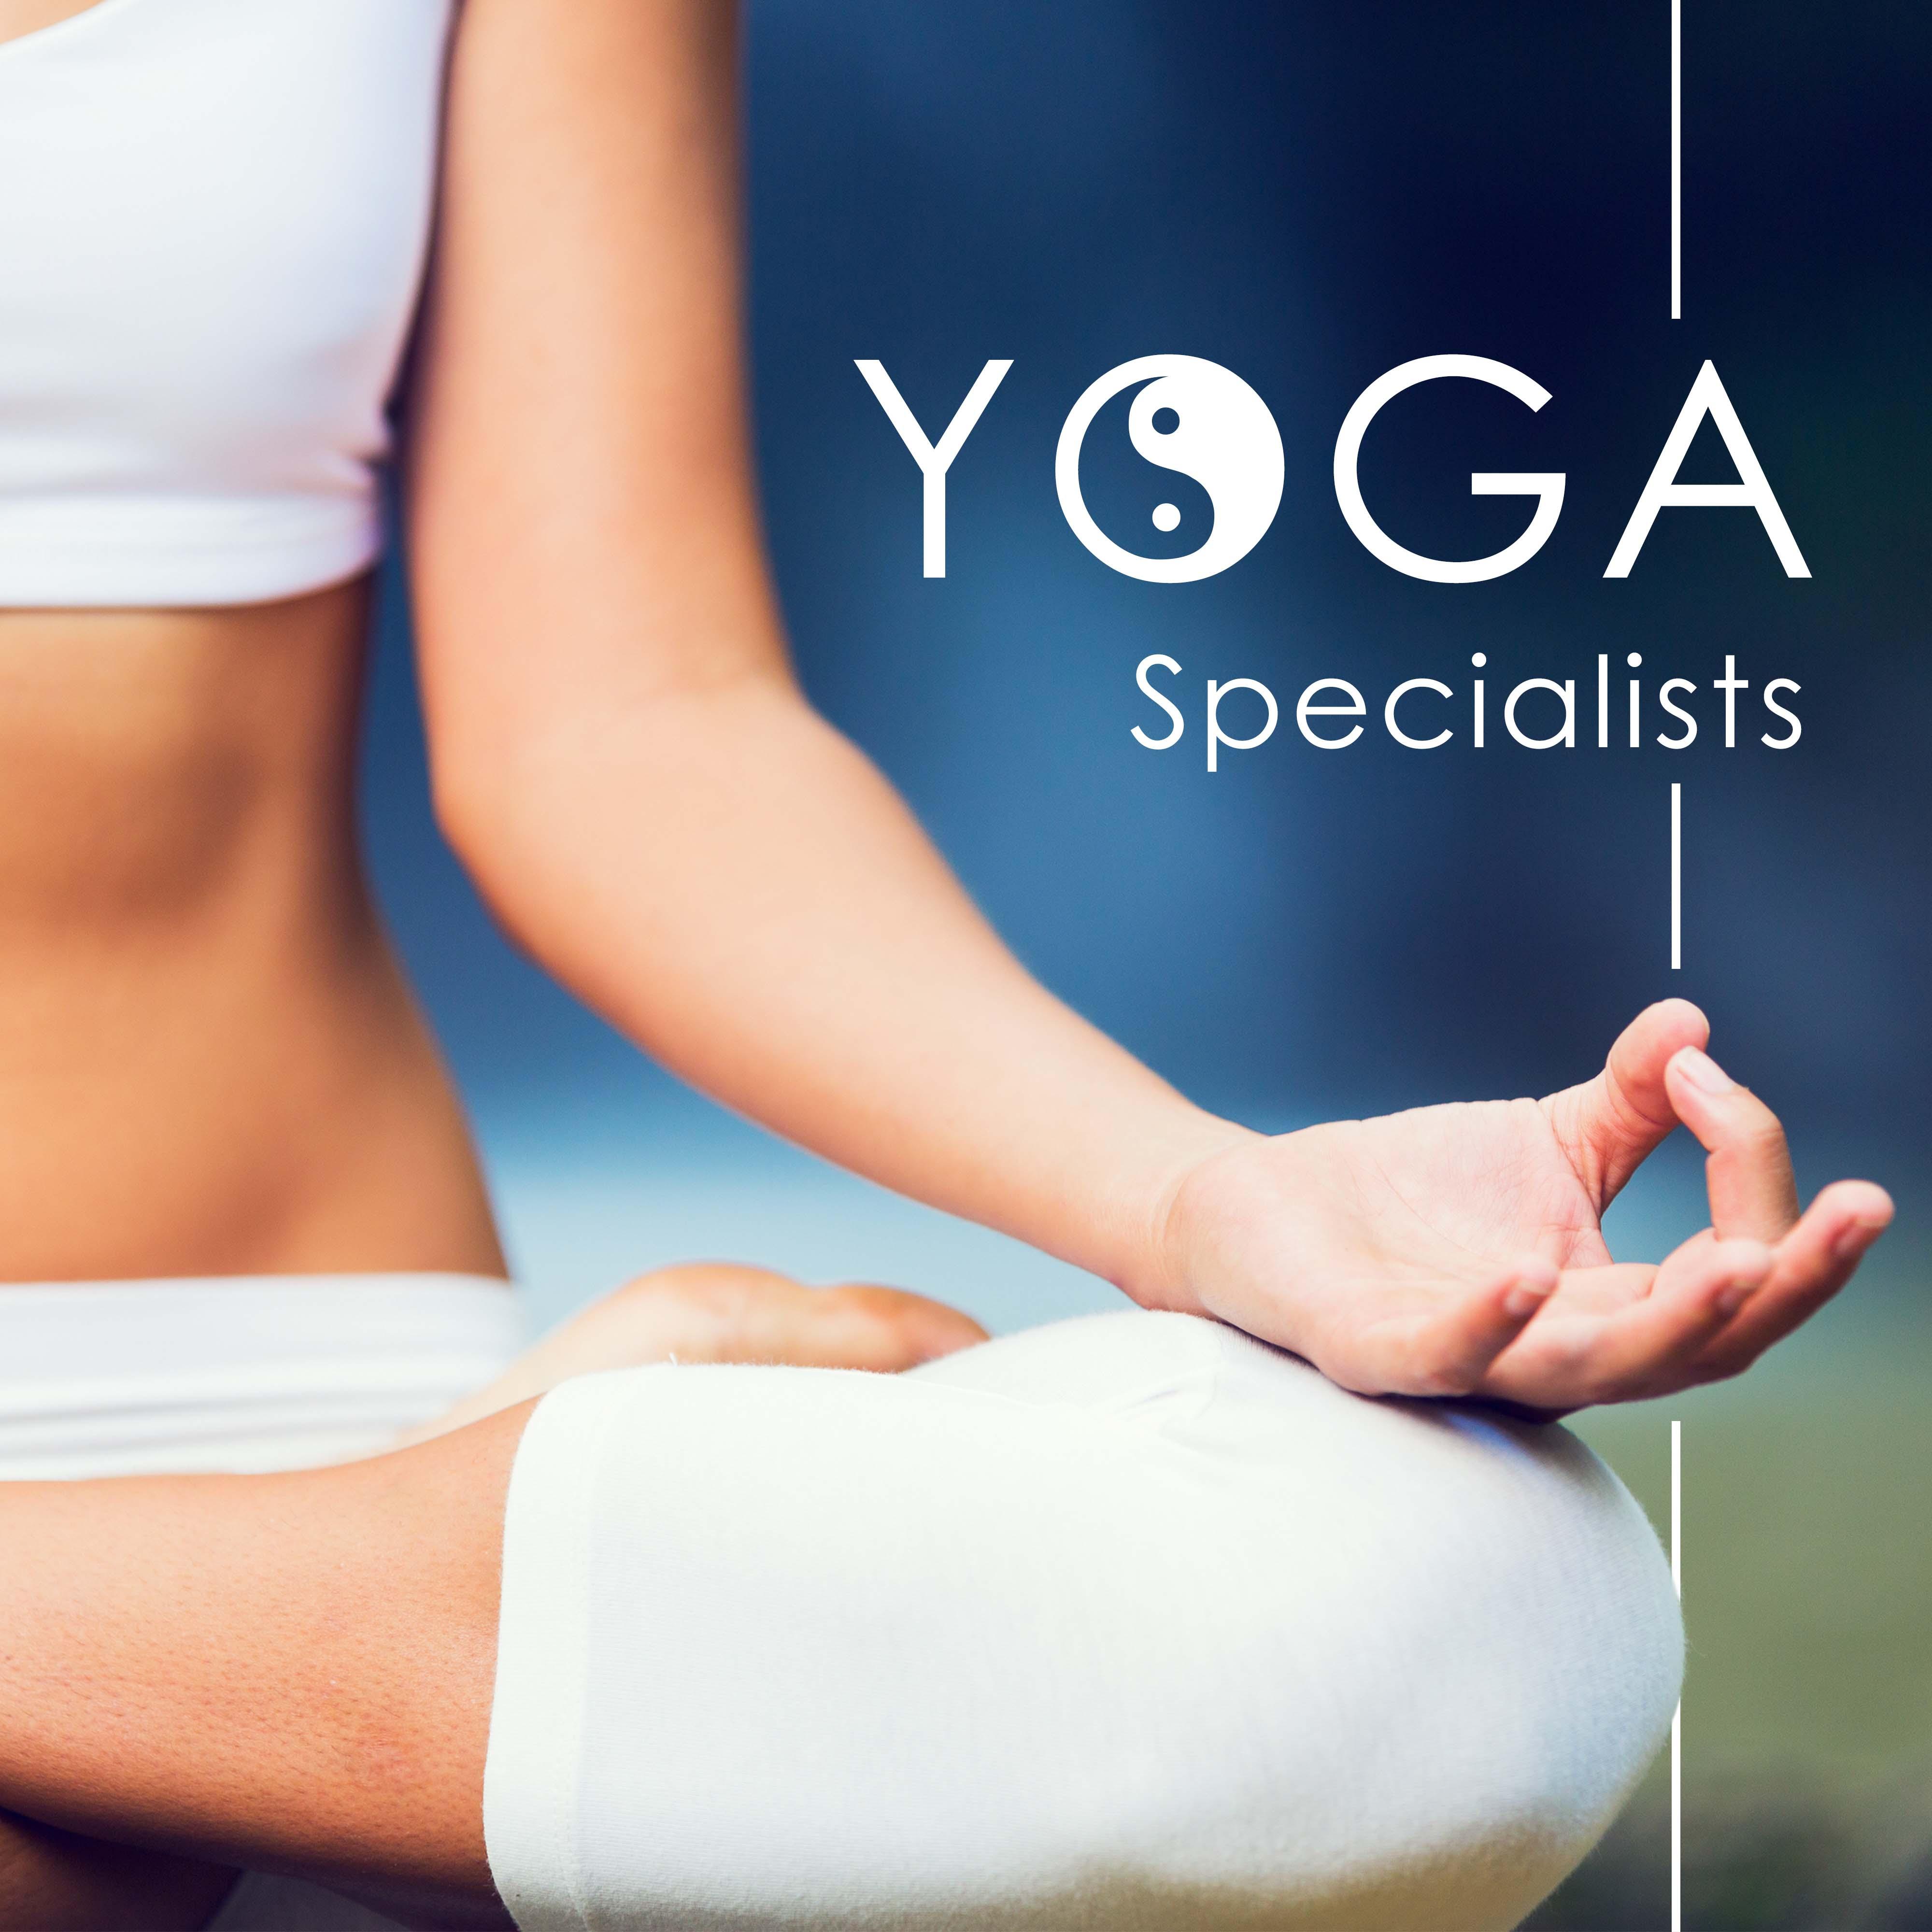 Yoga Specialists - Meditative Tracks for your Yoga Lessons